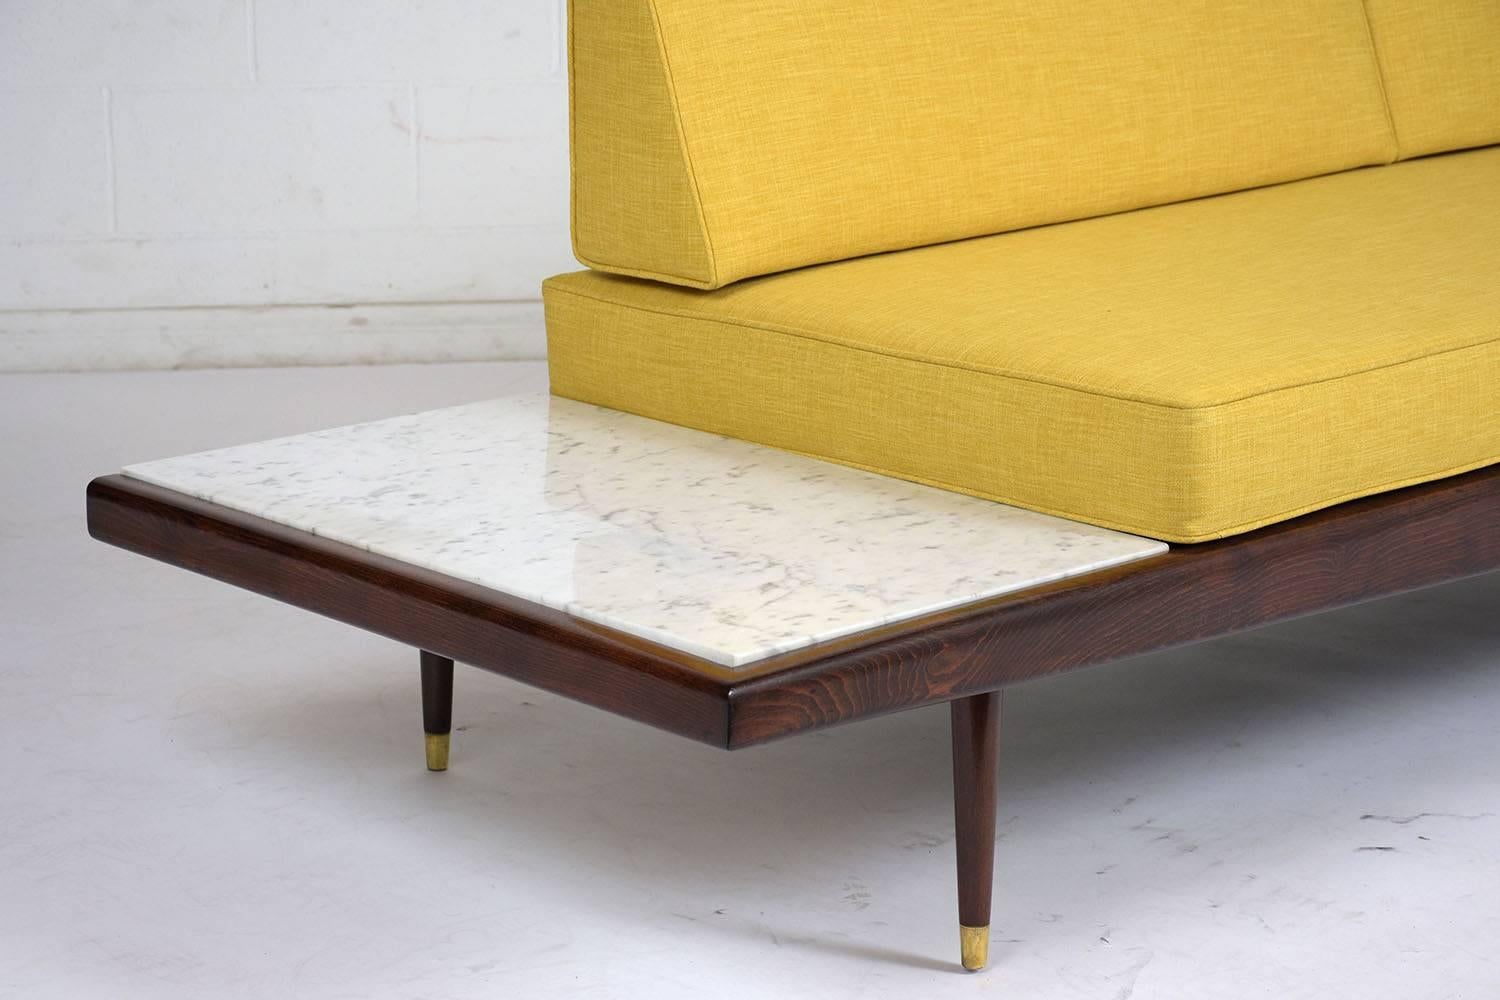 20th Century Midcentury Adrian Pearsall Sofa with Side Tables